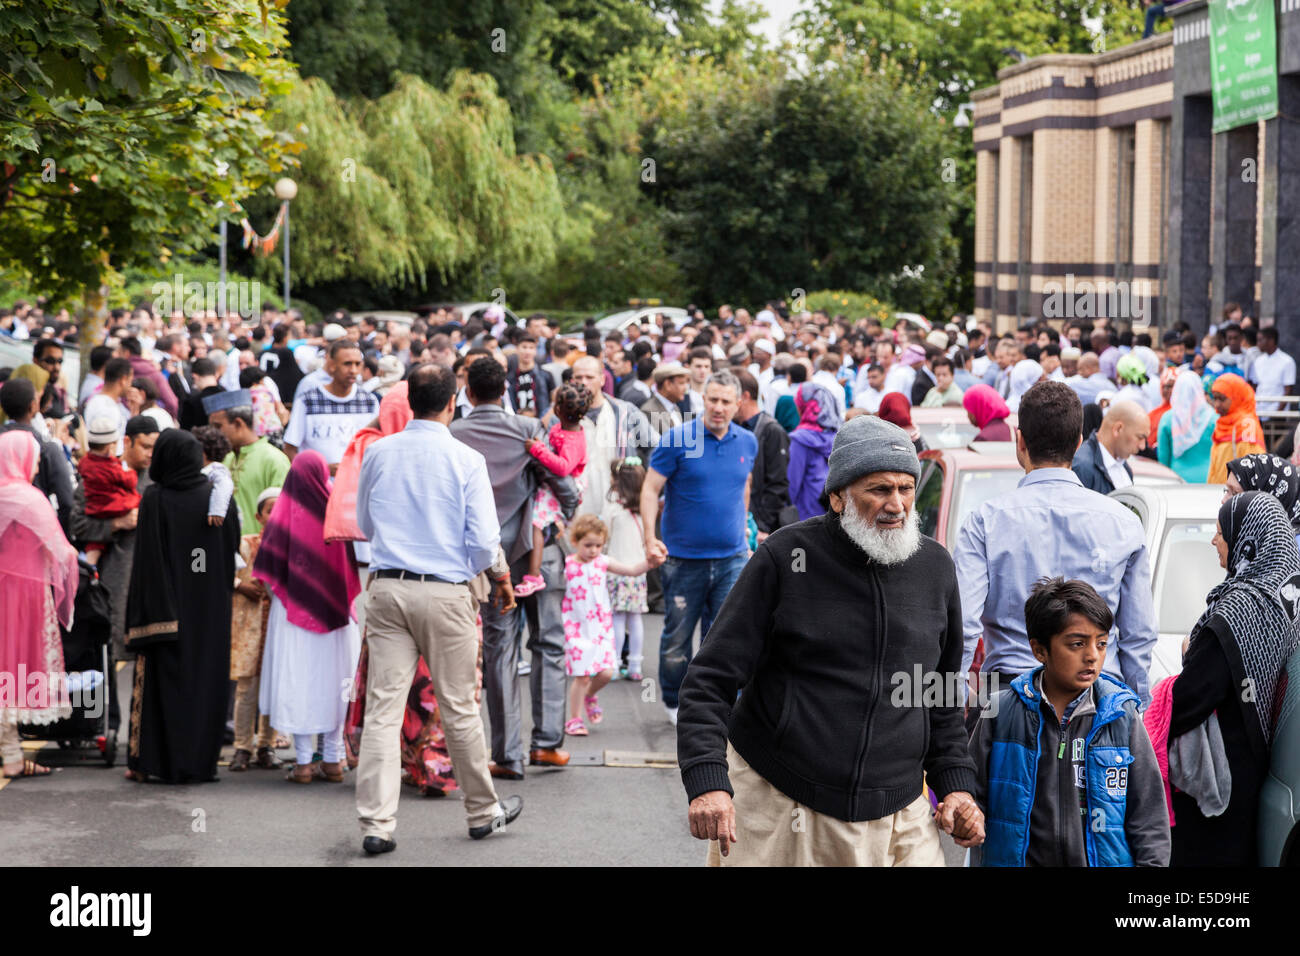 Dublin, Ireland. 28th July, 2014. Muslims gather to celebrate Eid starting with prayers in the mosque in Clonskeagh, Dublin.  Family and friends gathered as they celebrate after the holy month of Ramadhan. Credit:  Nazrie Abu Seman/Alamy Live News Stock Photo